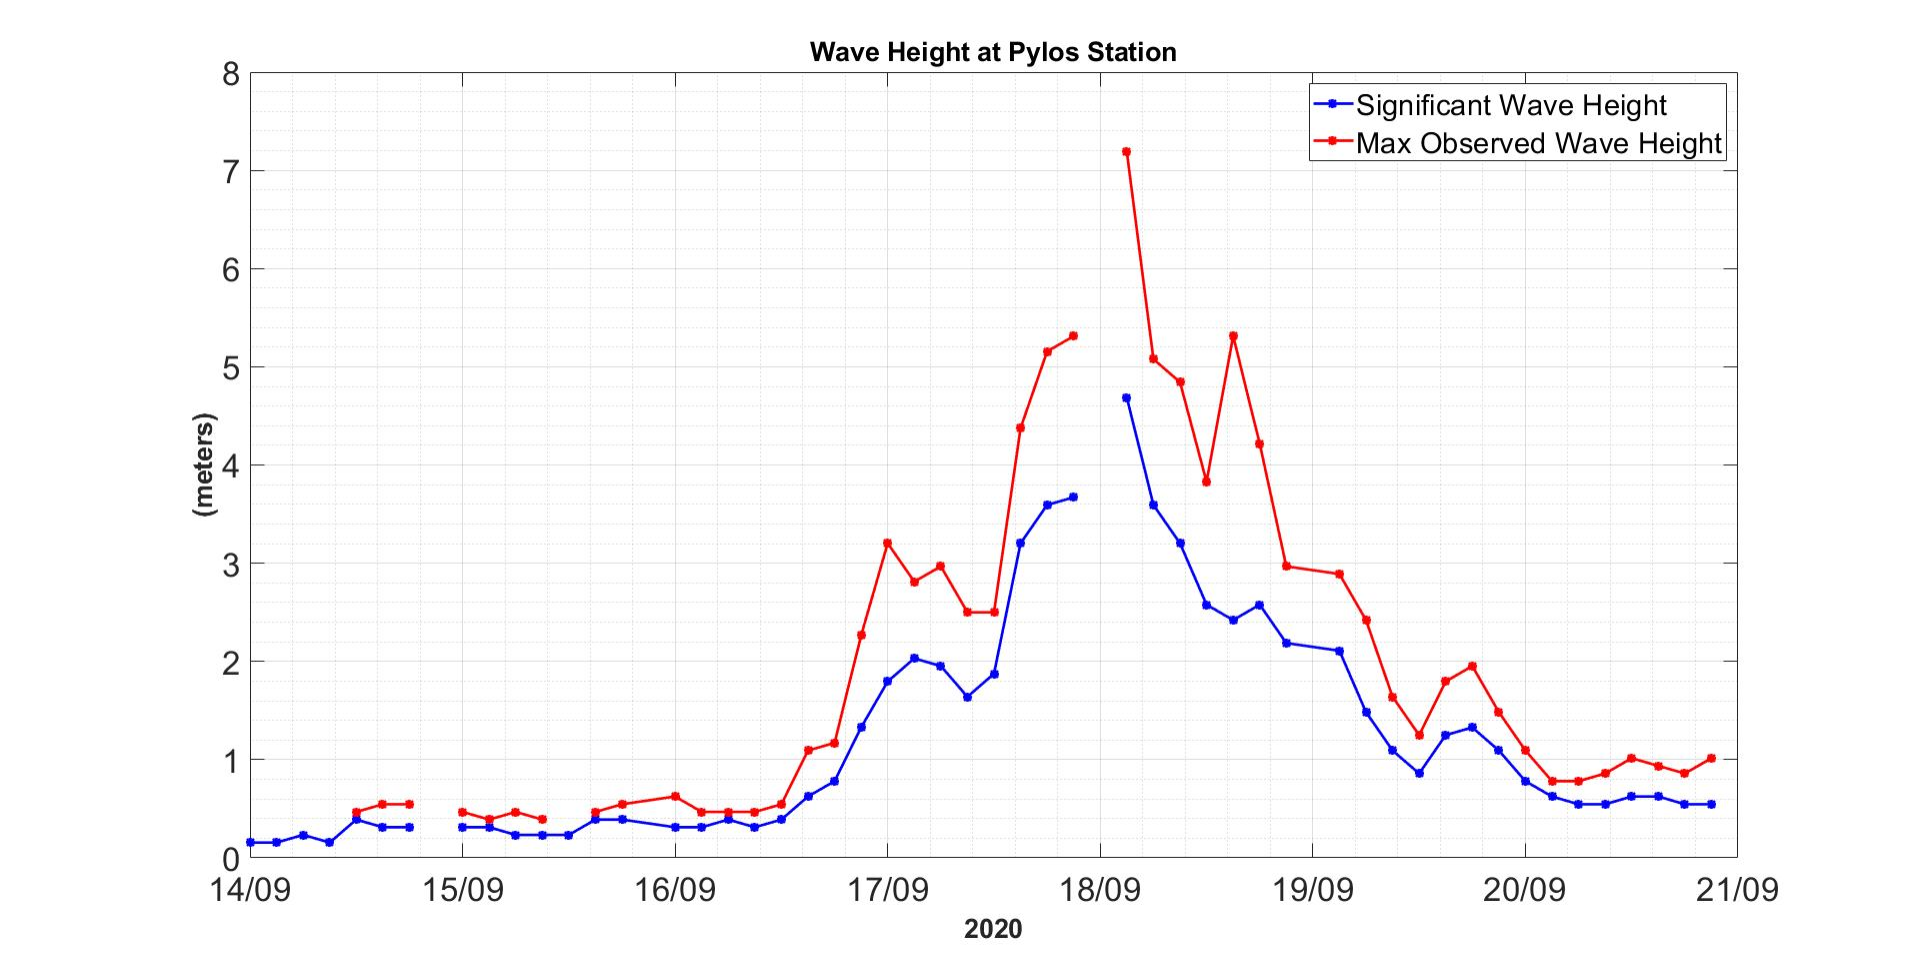 Significant wave height (blue) and maximum observed wave height (red) as measured by the Pylos buoy station